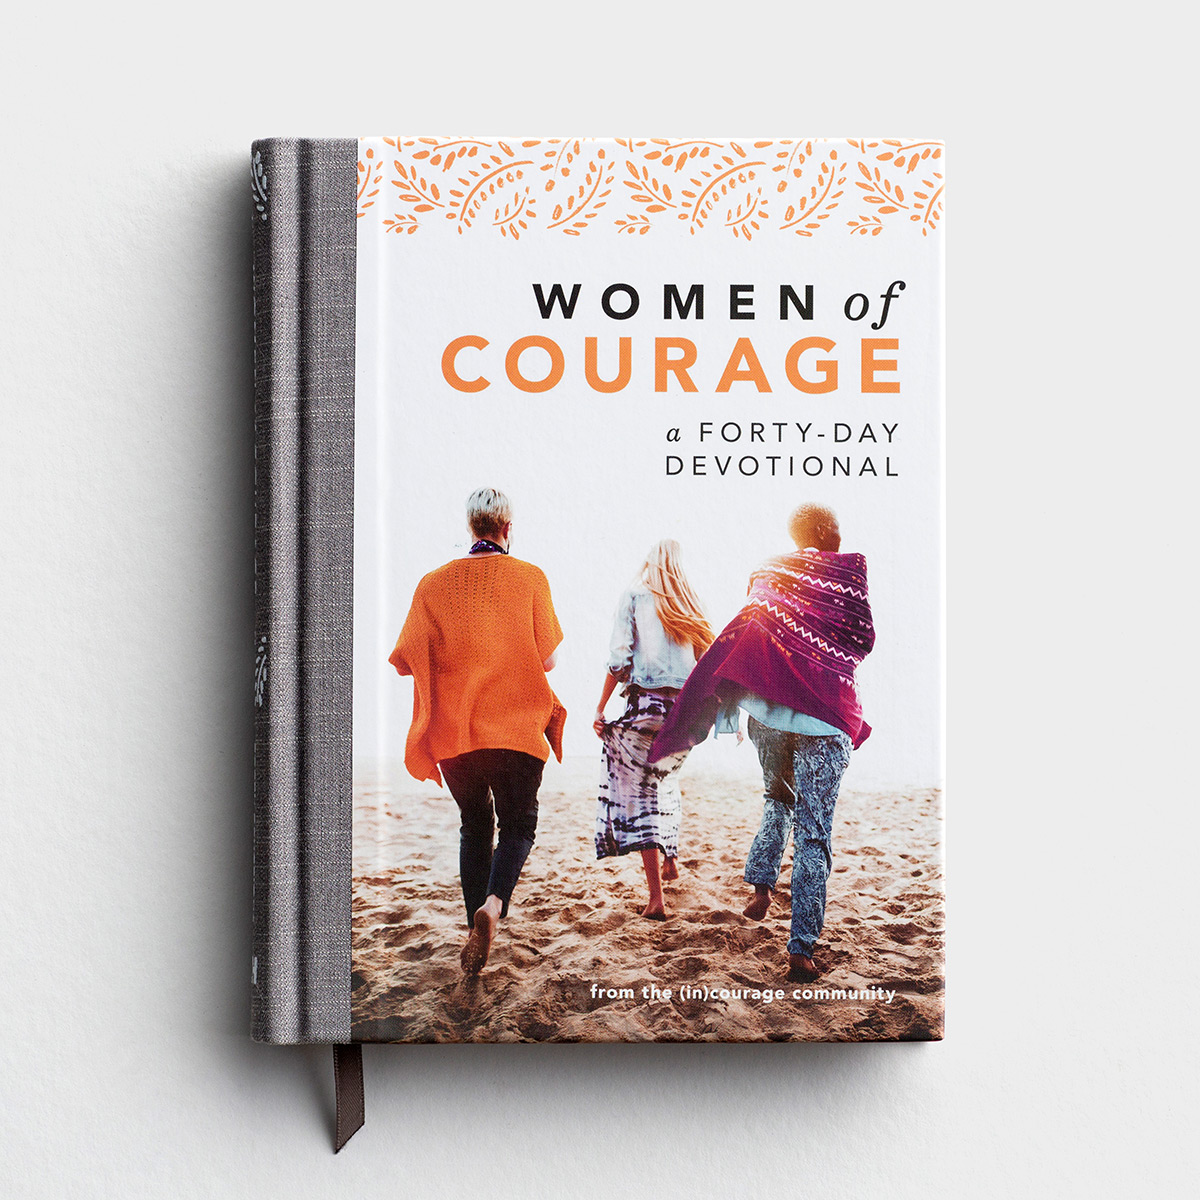 (in)courage - Women of Courage: A Forty-Day Devotional